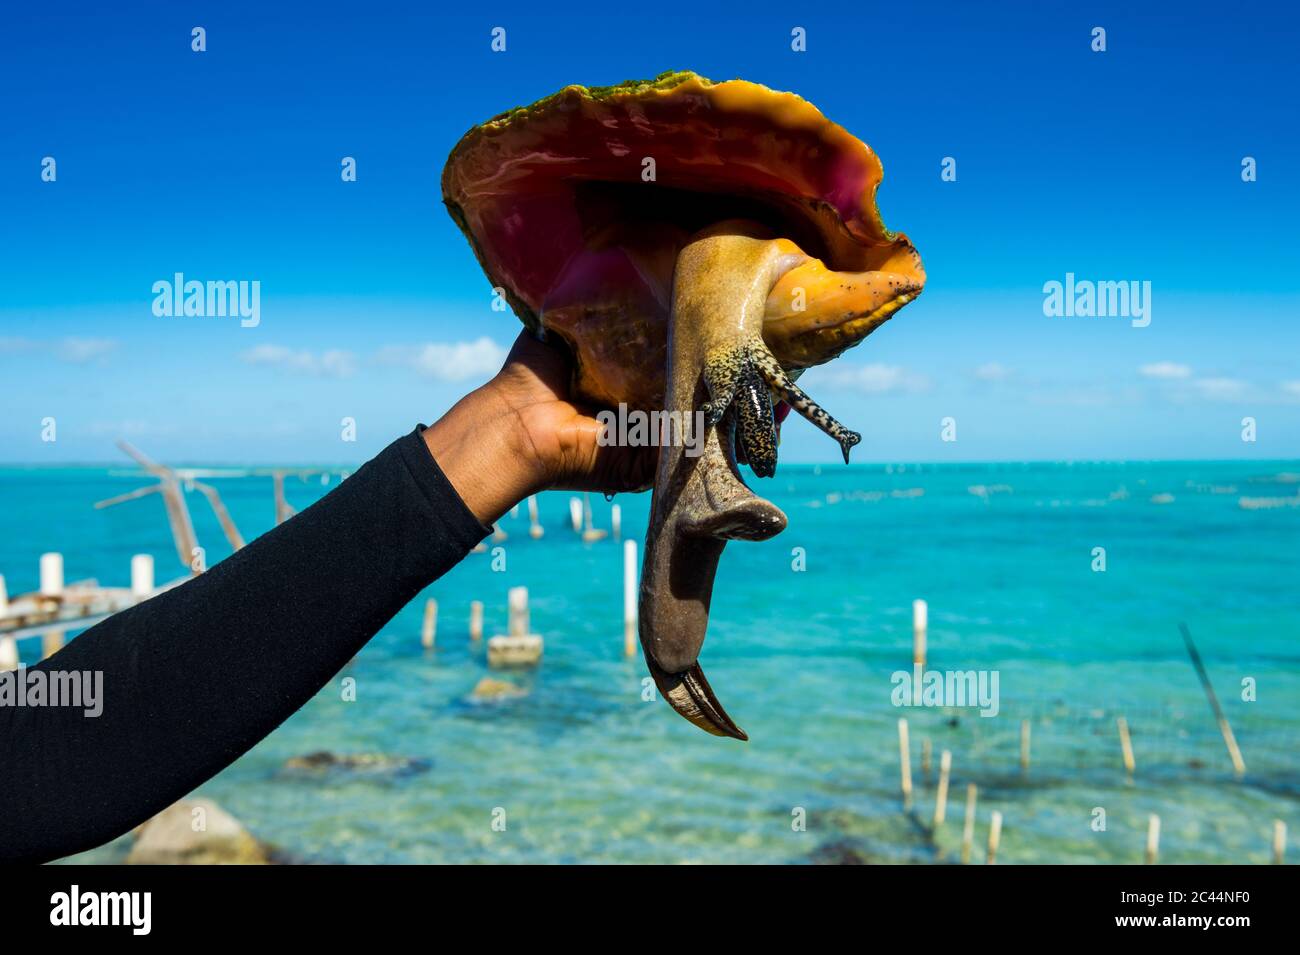 Cropped hand of woman holding queen conch against sea, Providenciales, Turks And Caicos Islands Stock Photo